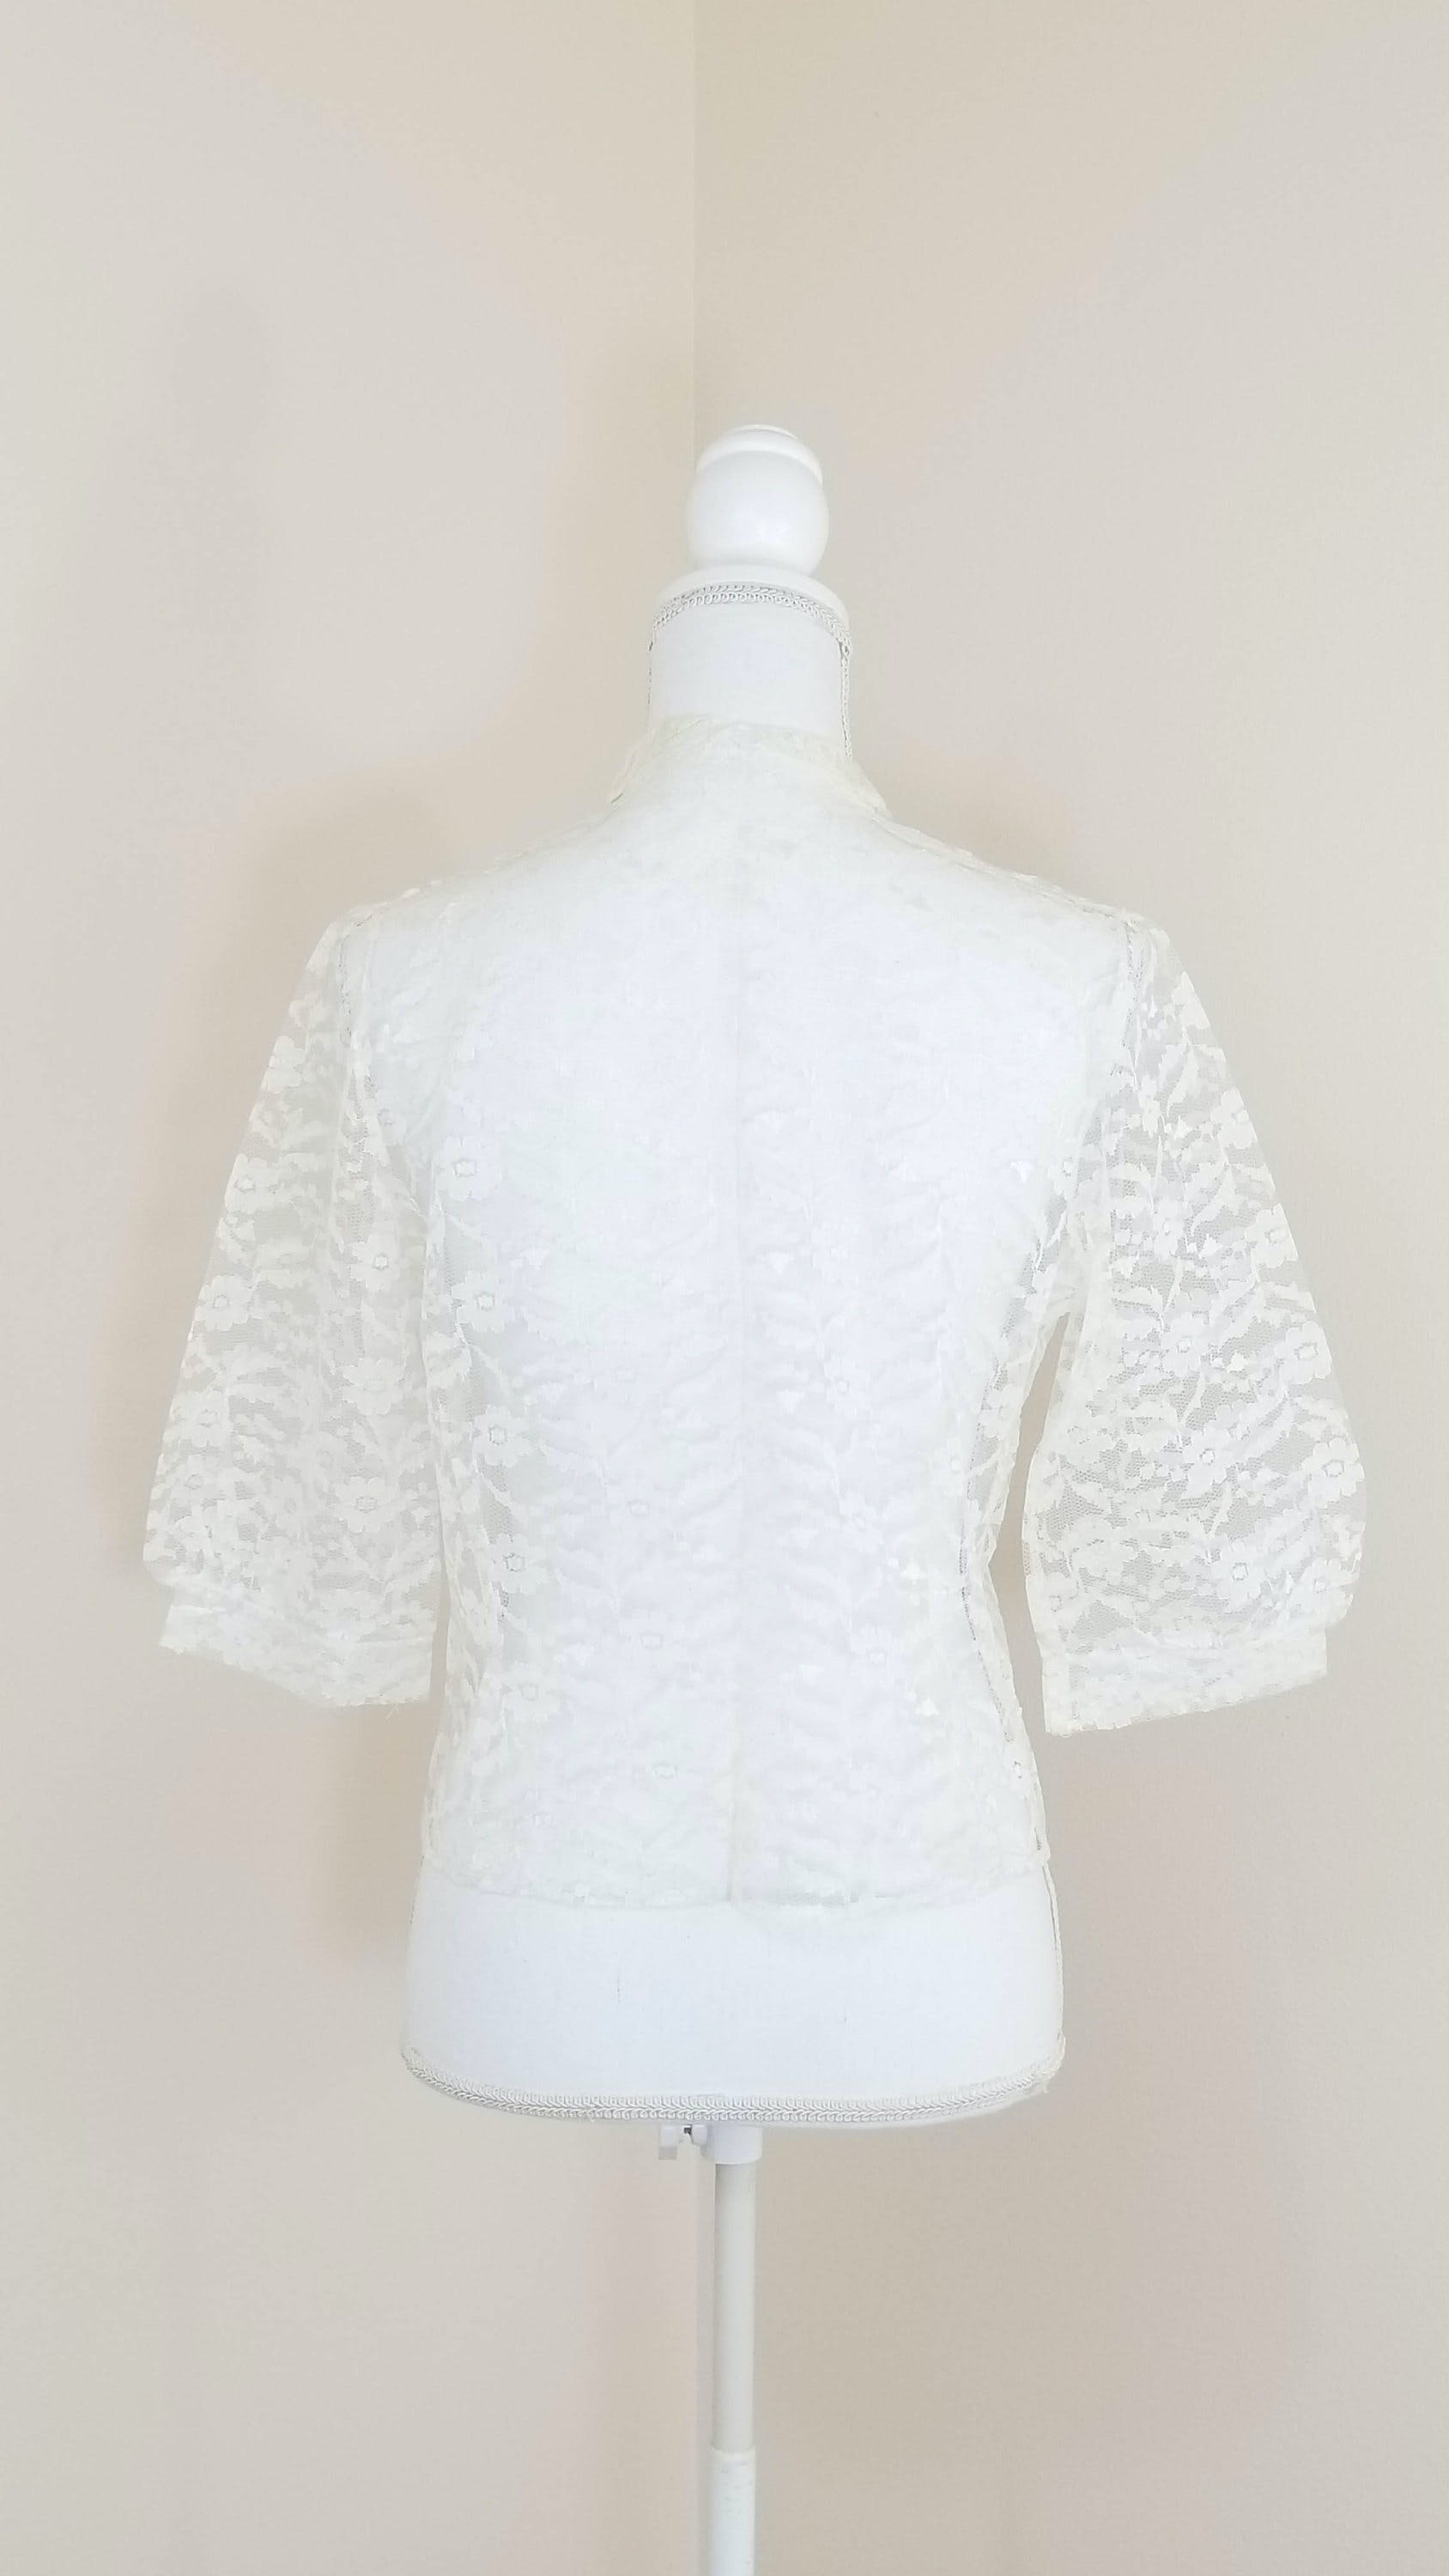 Vintage 60’s White Lace Button Up Blouse with Studded Collar | Shop ...